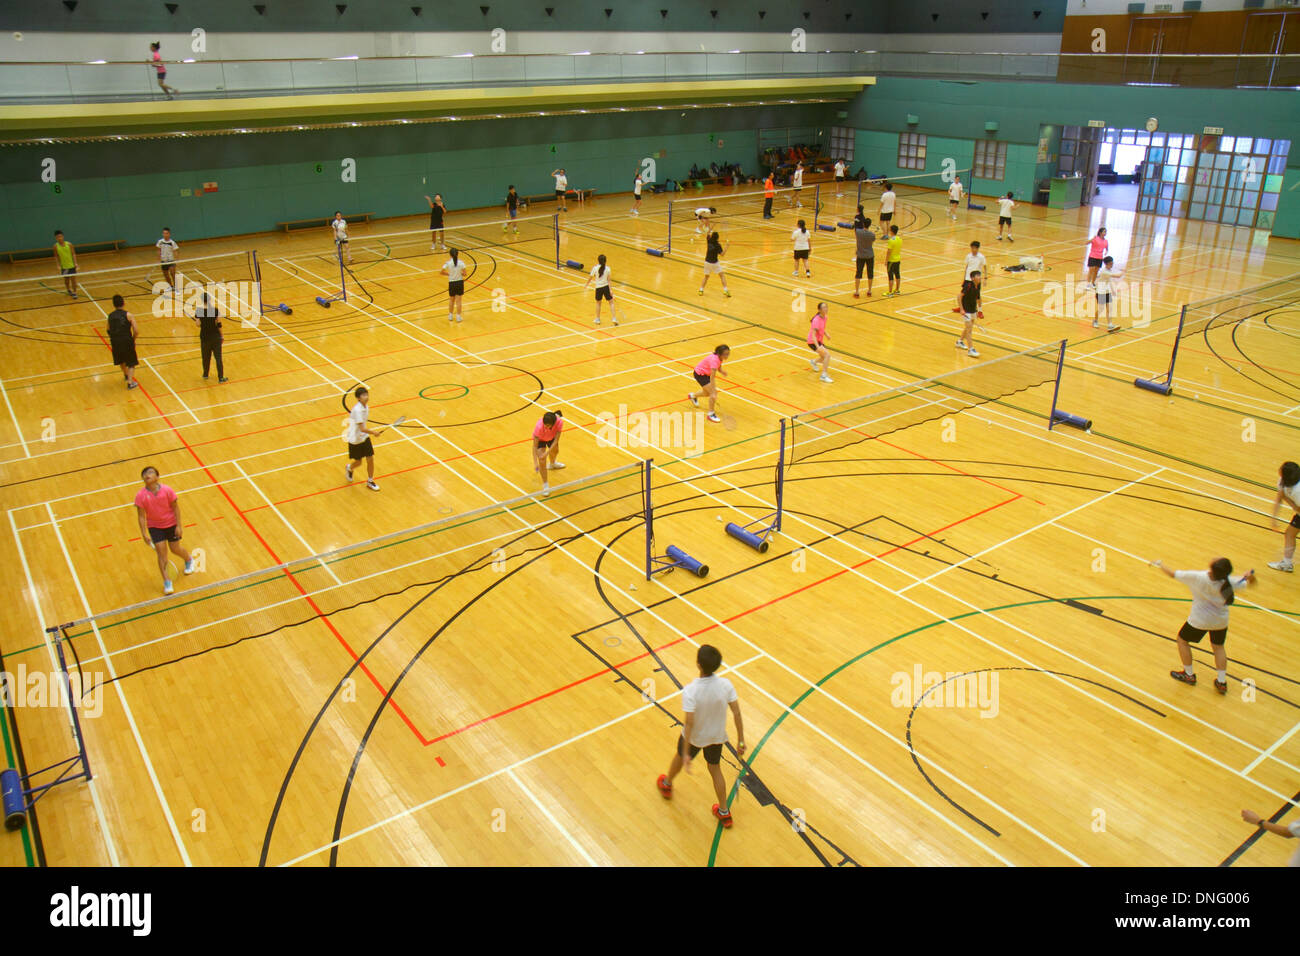 Hong Kong China,HK,Asia,Chinese,Oriental,Island,Central,Hong Kong Park Sports Centre,center,badminton courts,indoor,gymnasium,Asian Asians ethnic immi Stock Photo